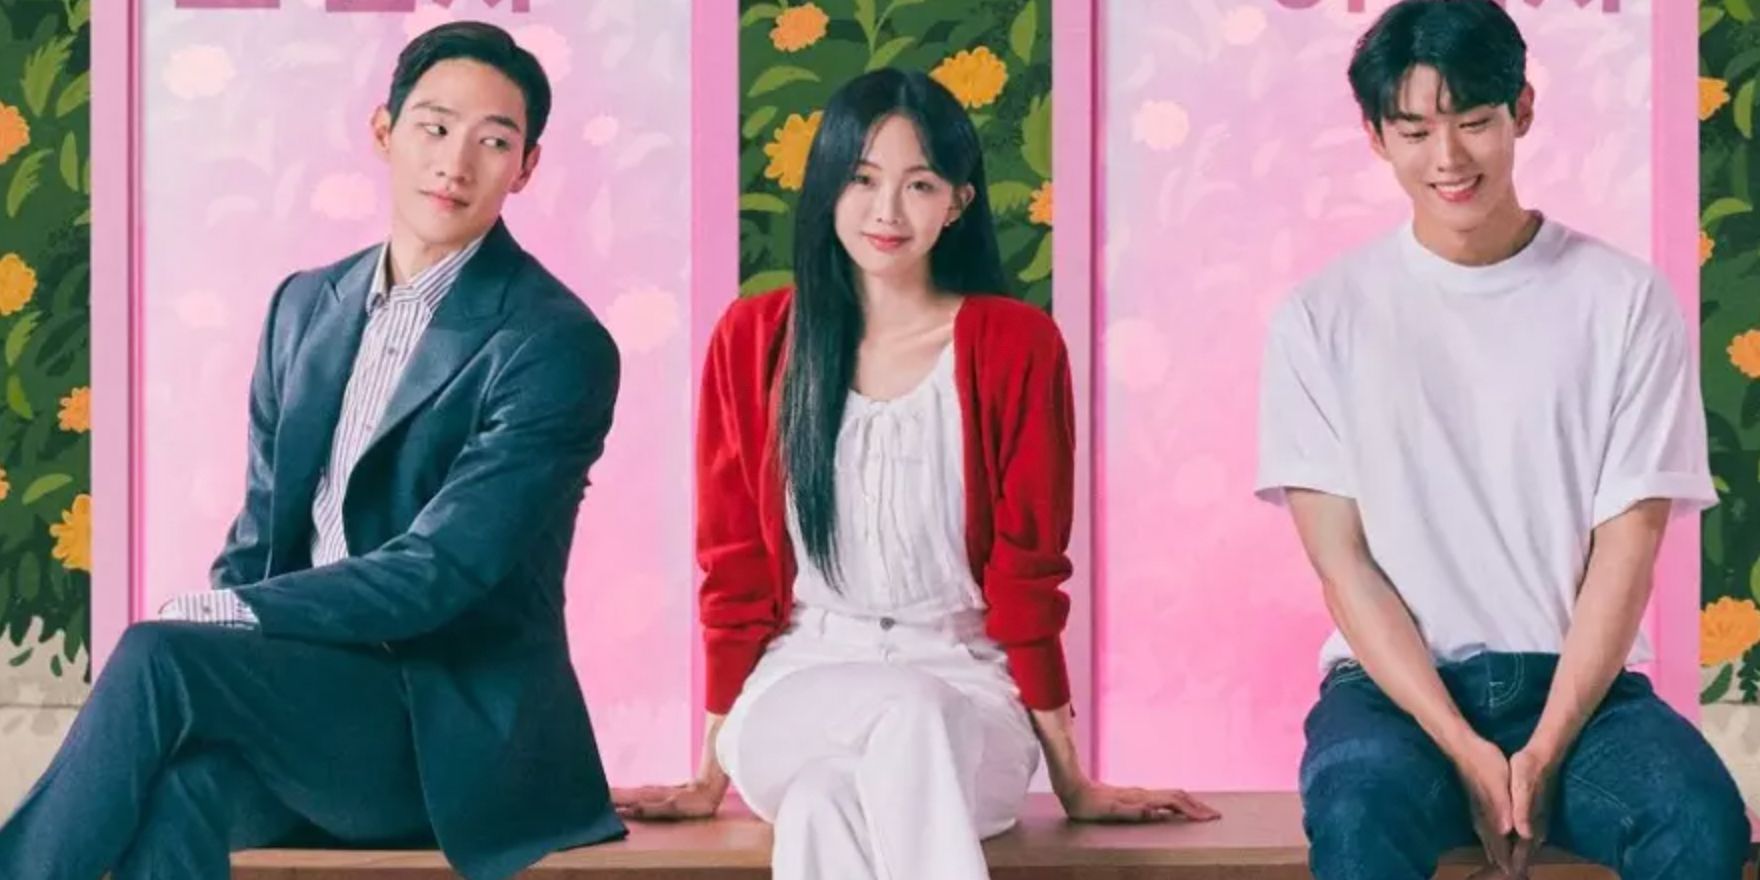 A woman sits between two men in a promotional image for Soundtrack 2